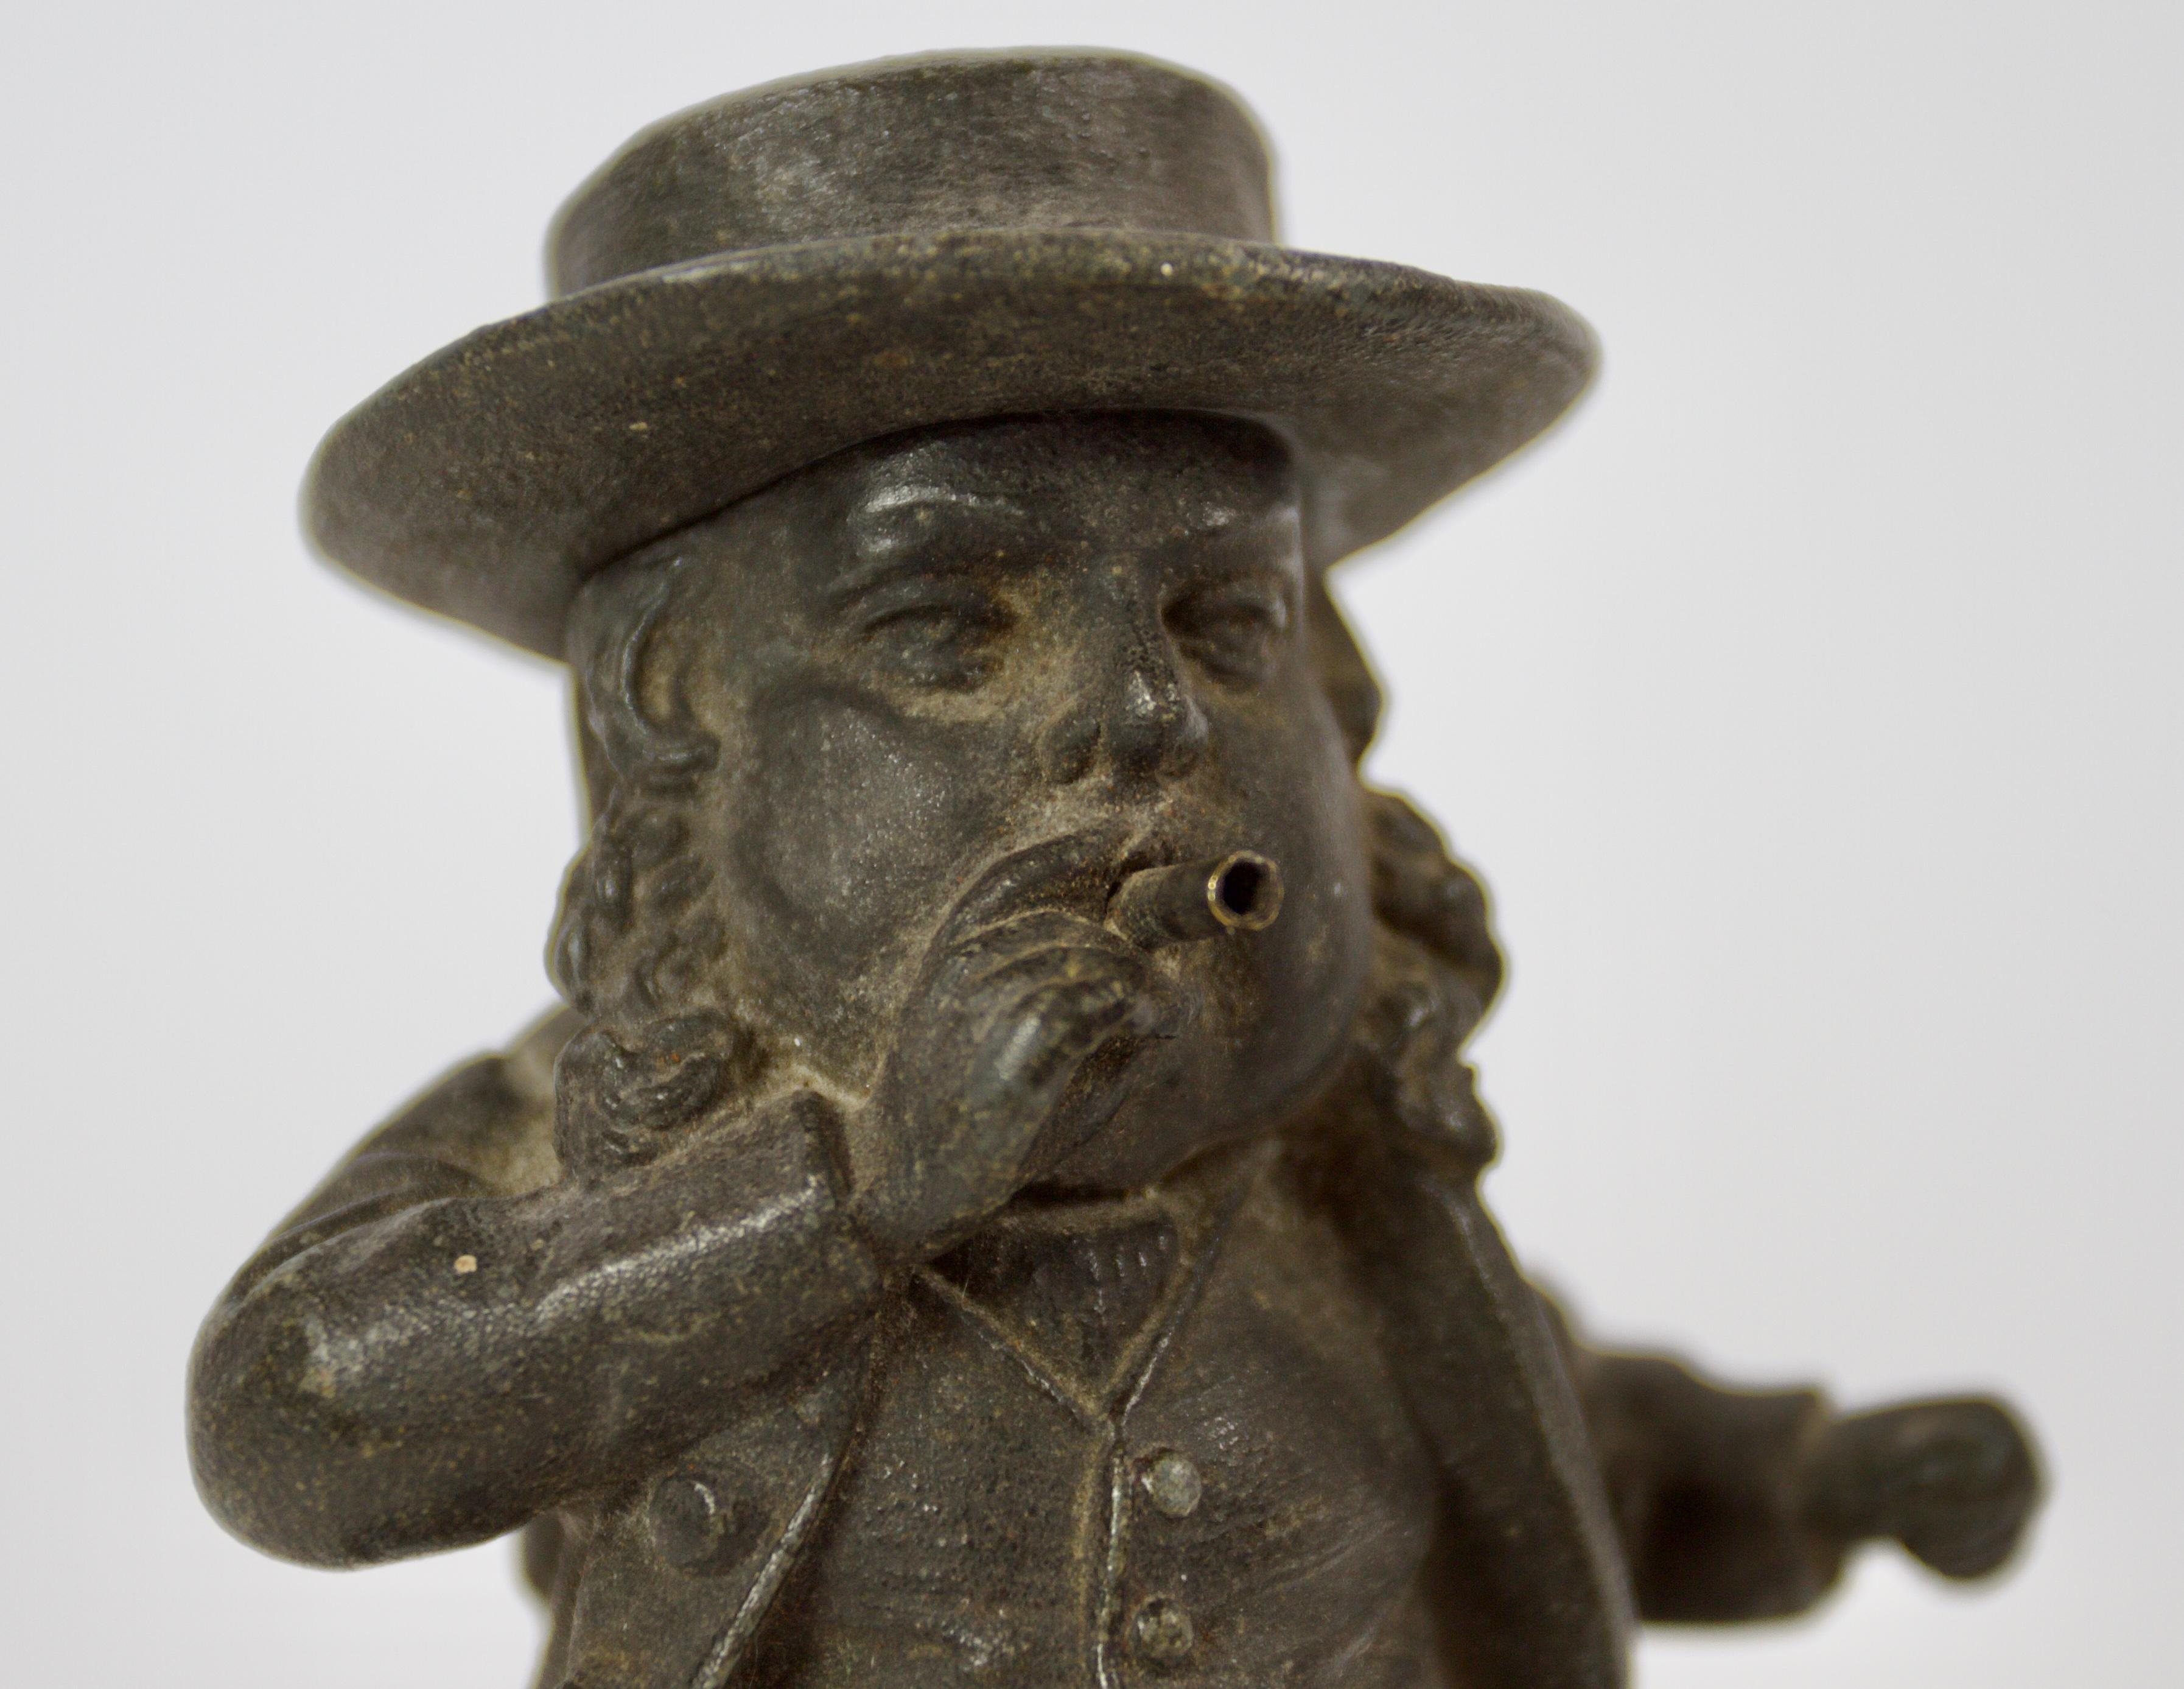 Victorian Cast Iron Bar/counter Cigarette Lighter
In the Form of a smoking Gentleman. 
Hat Hinges open, the hollow body to hold a coil wick
with threads through the gentlemans mouth 
Which would be  alight with a flame
Circlular base with wording A